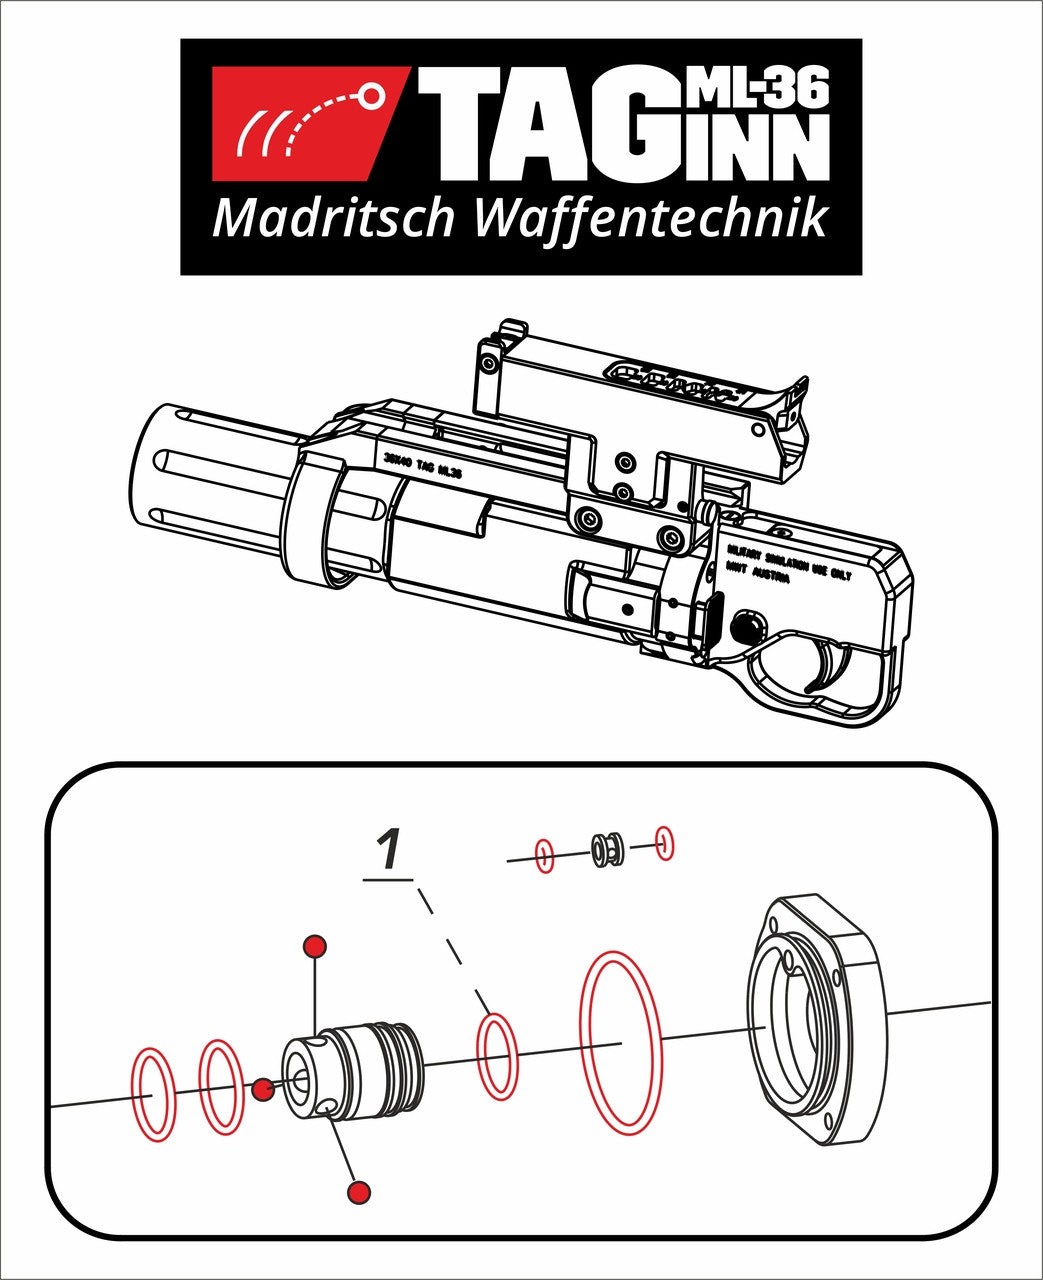 TAGINN O-ring Repair Kit for "TAG-ML36" Stand Alone Launcher System